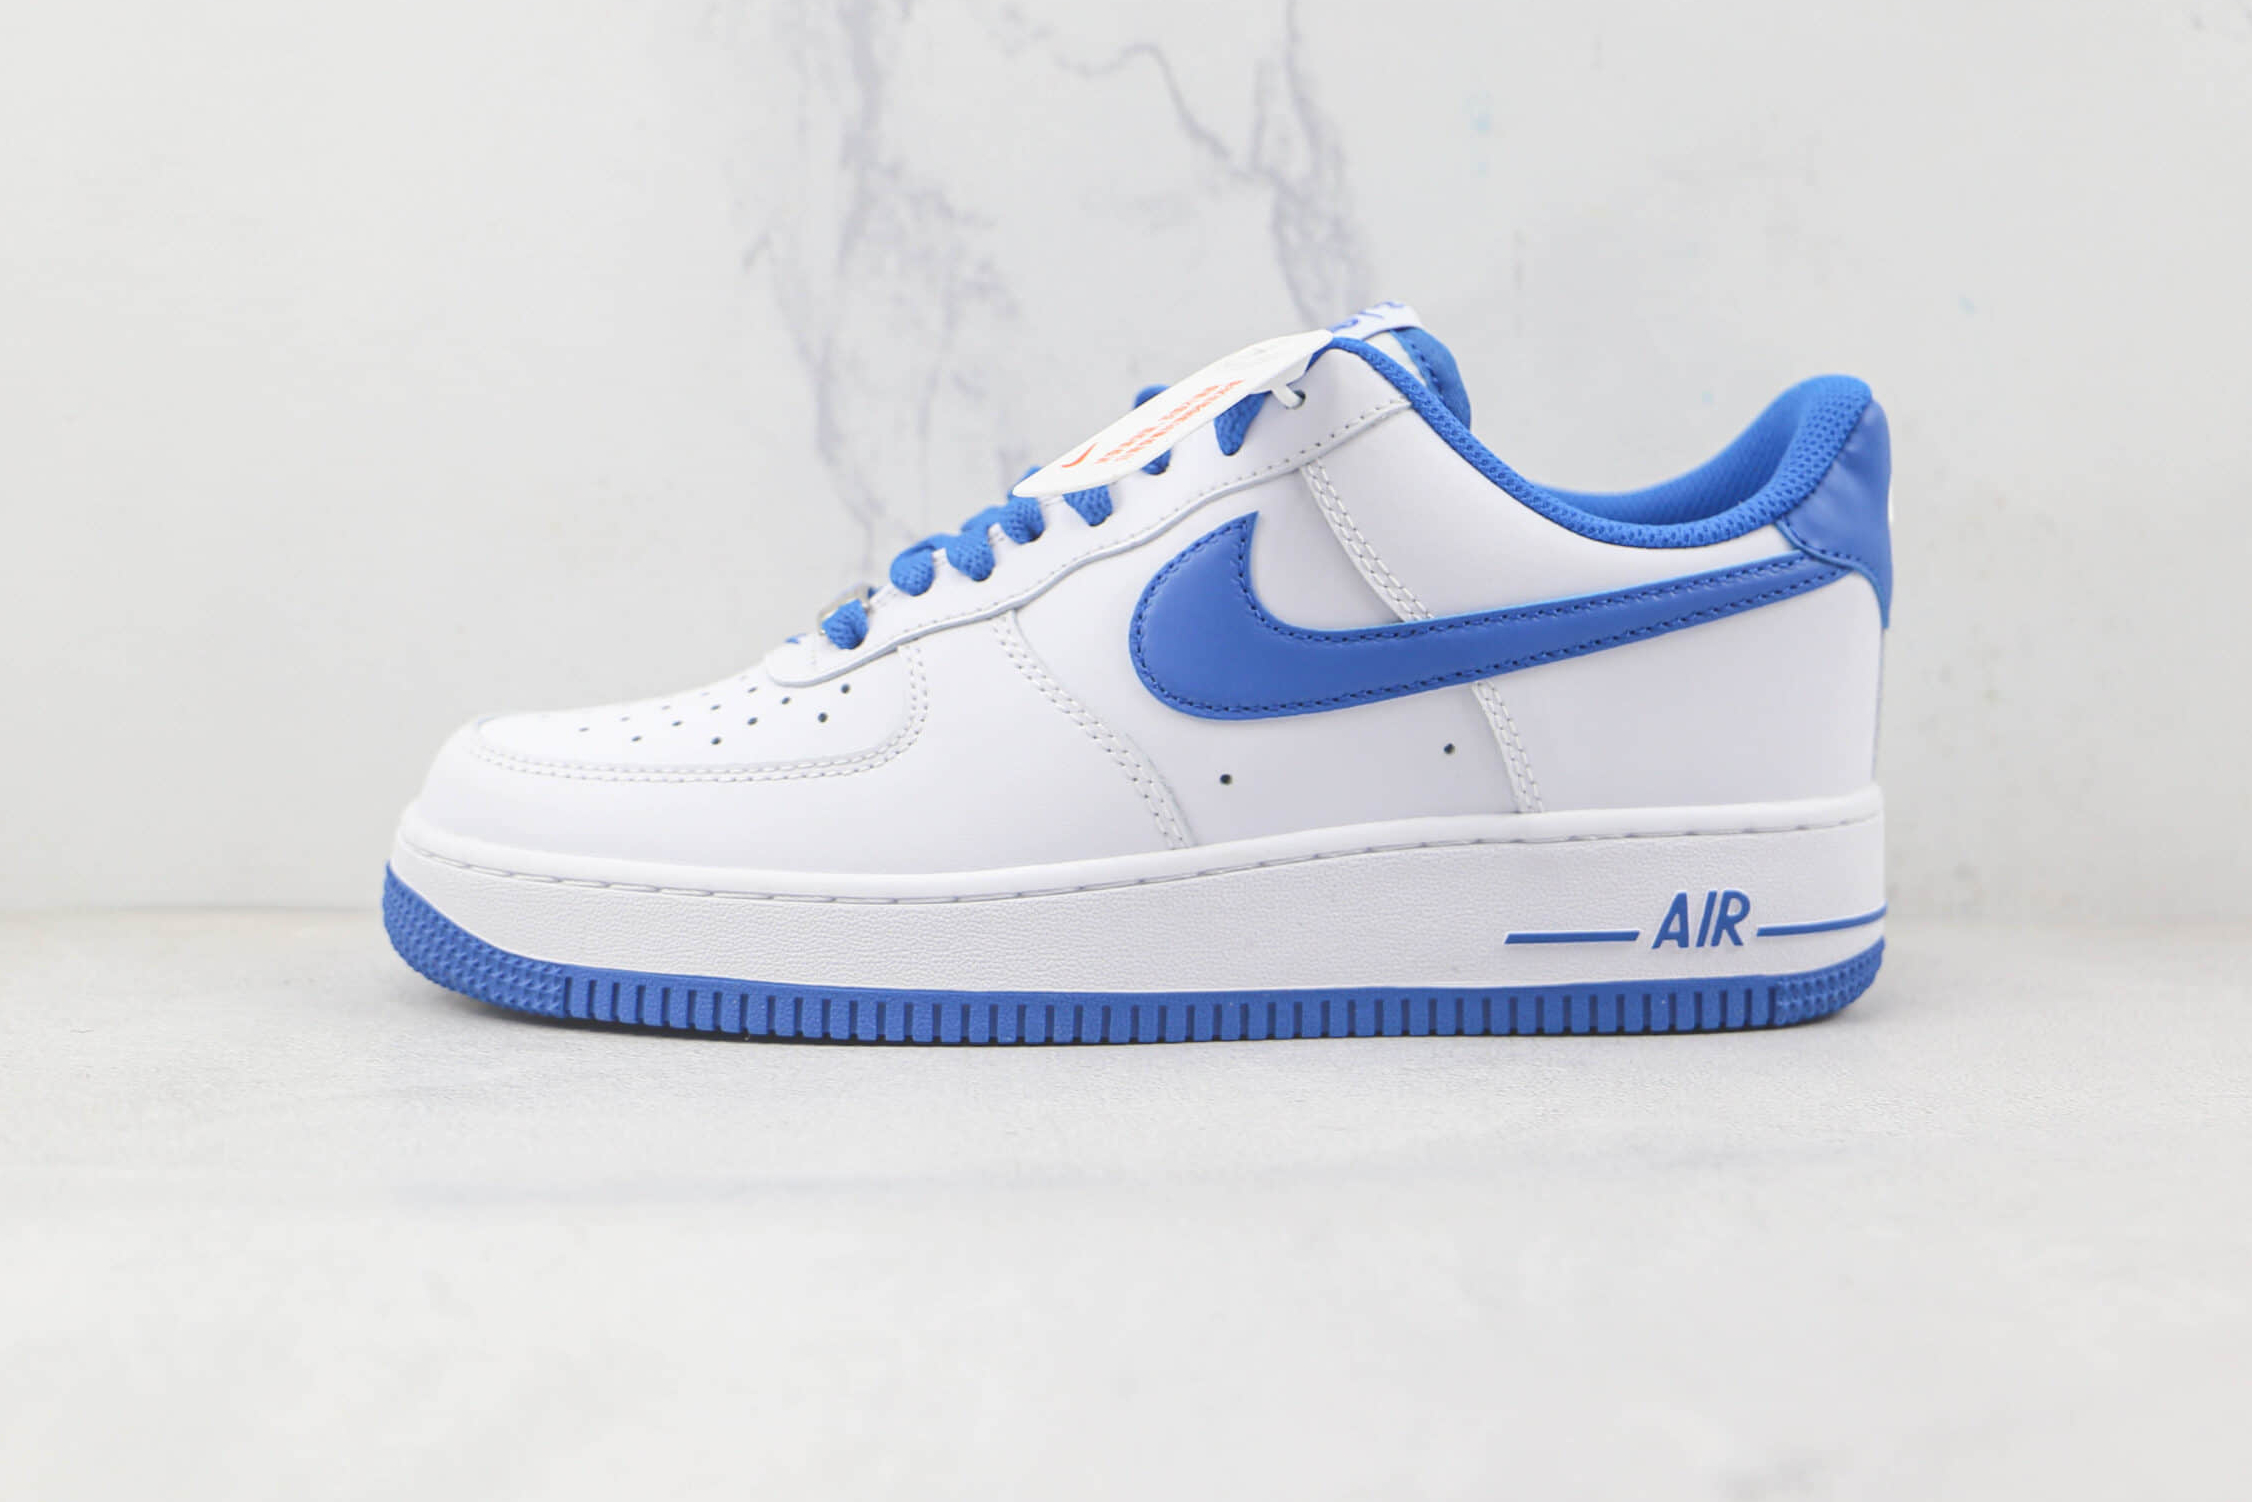 Nike Air Force 1 '07 'White Medium Blue' DH7561-104 - Stylish and Versatile Footwear for Men and Women